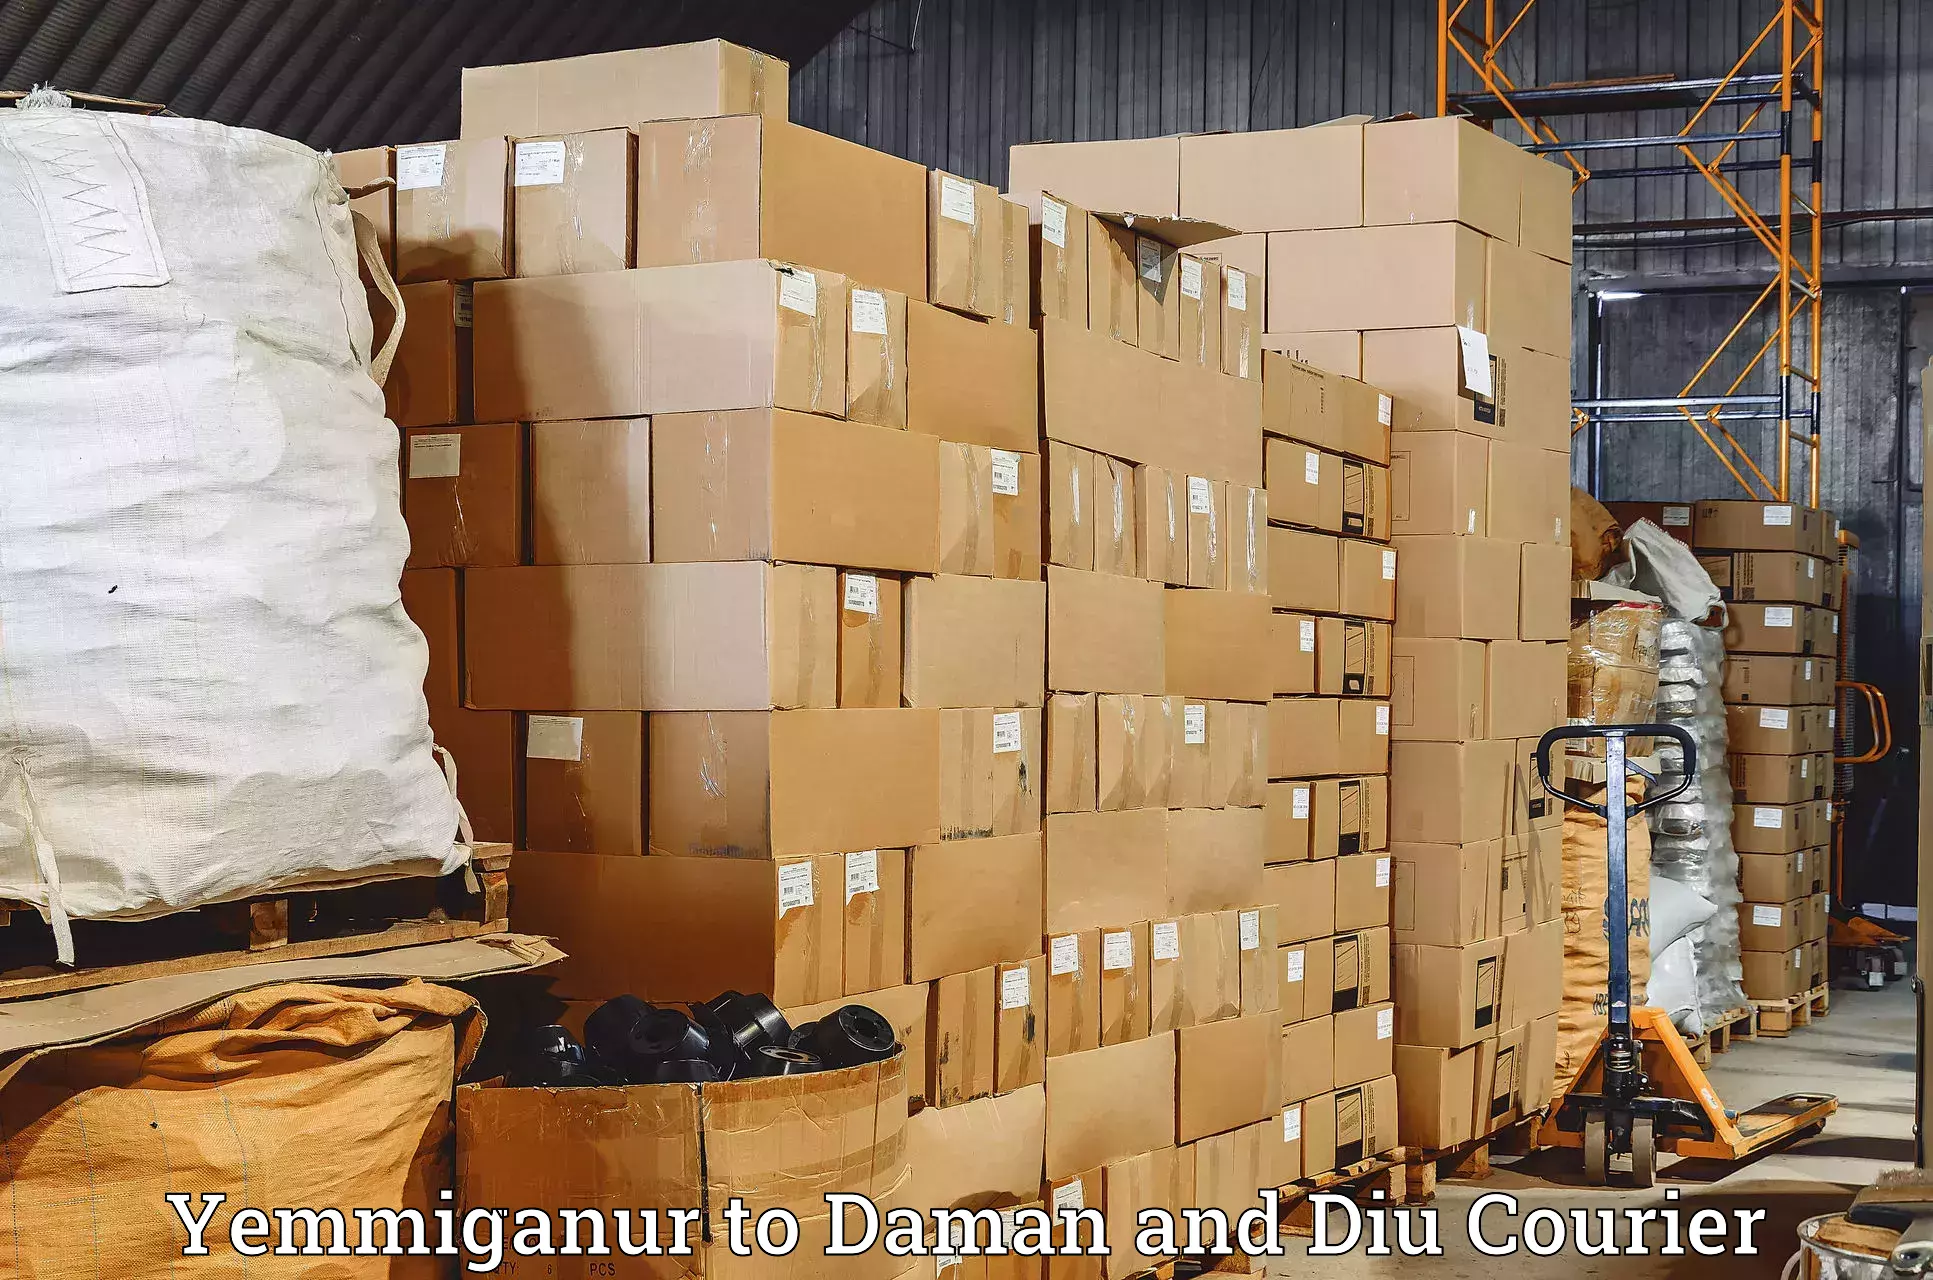 Tailored shipping plans Yemmiganur to Diu